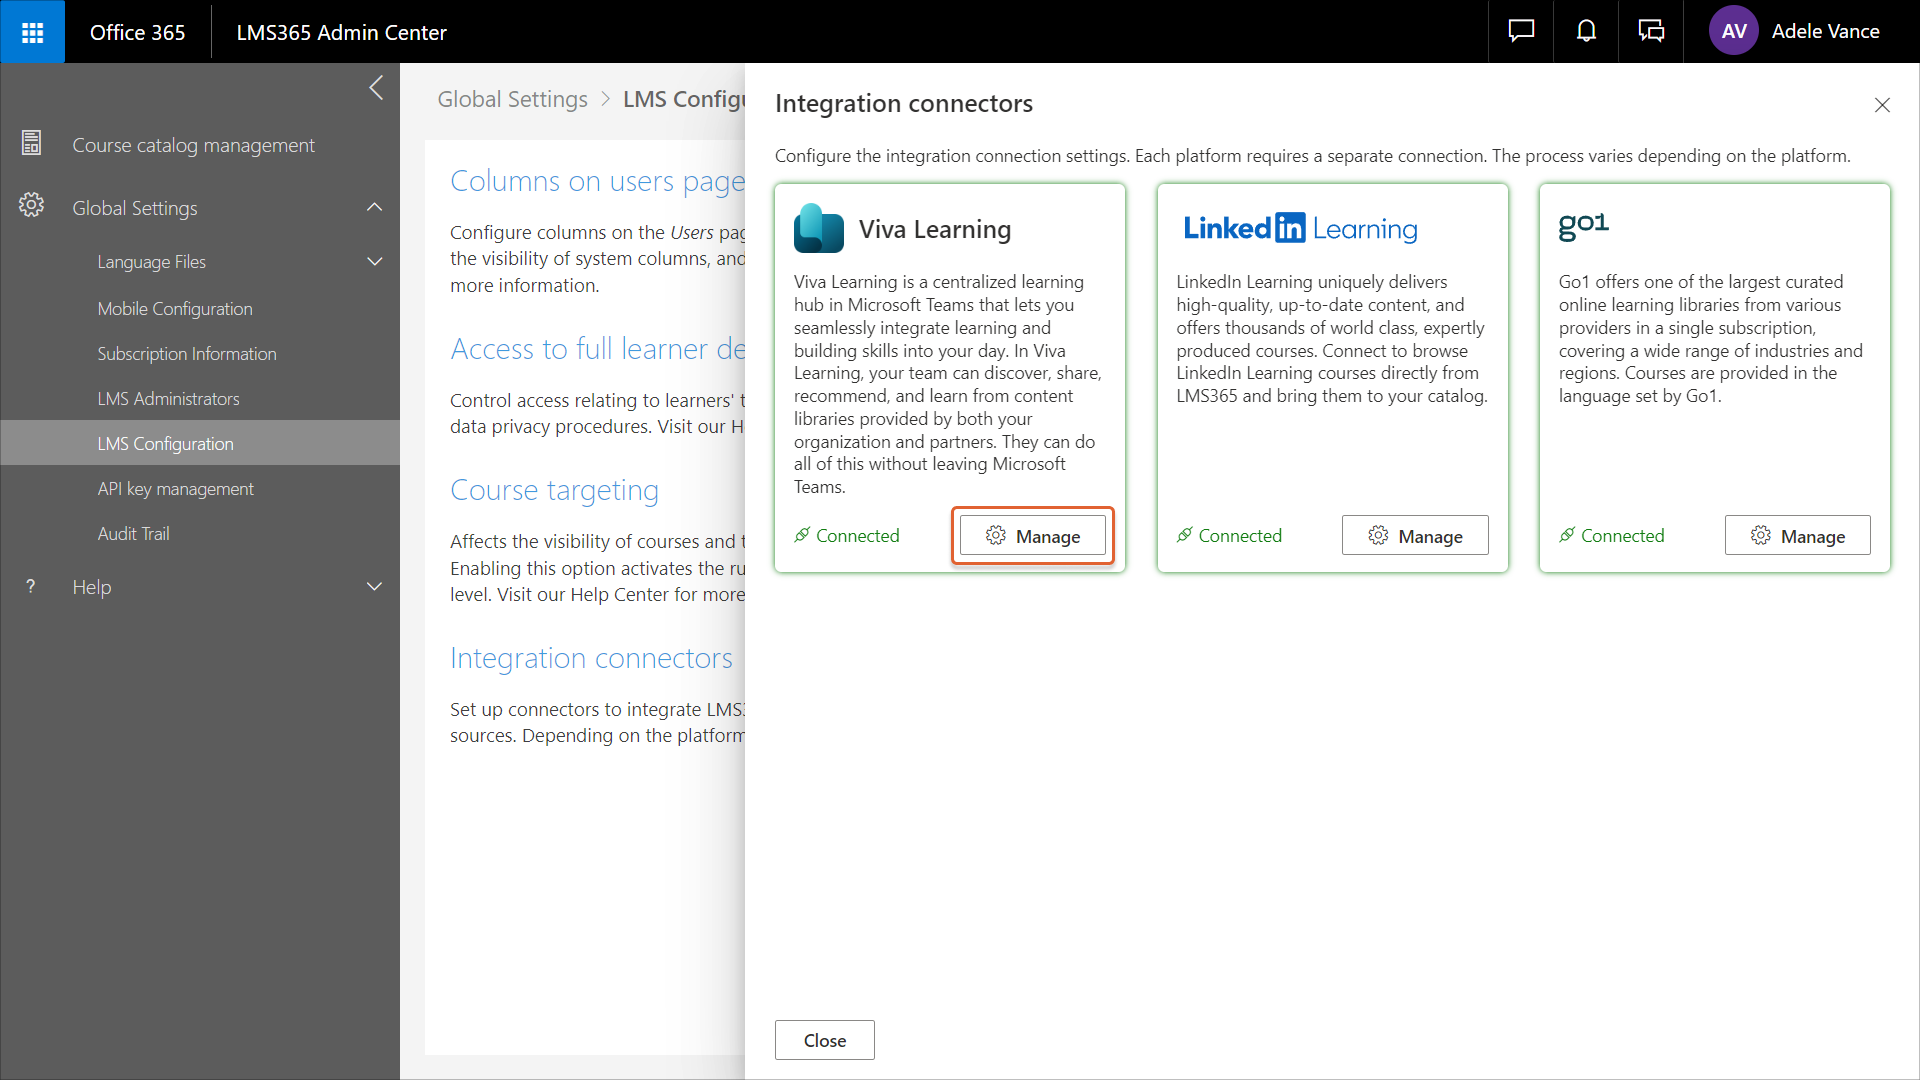 Manage icon on the Viva Learning integration tile